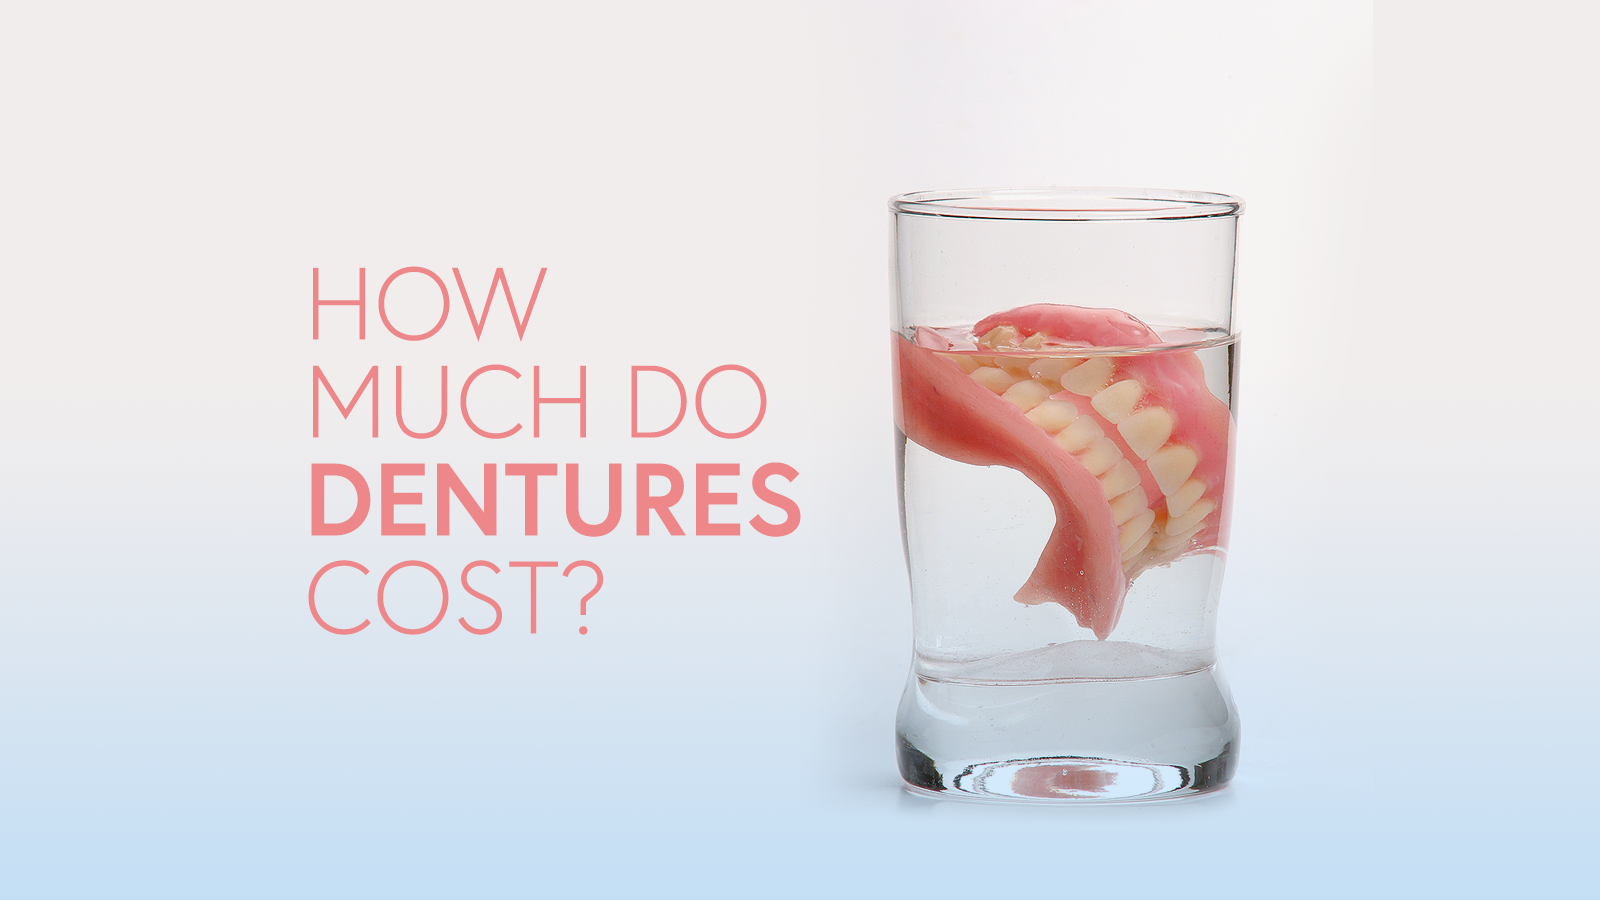 Dentures in a cup